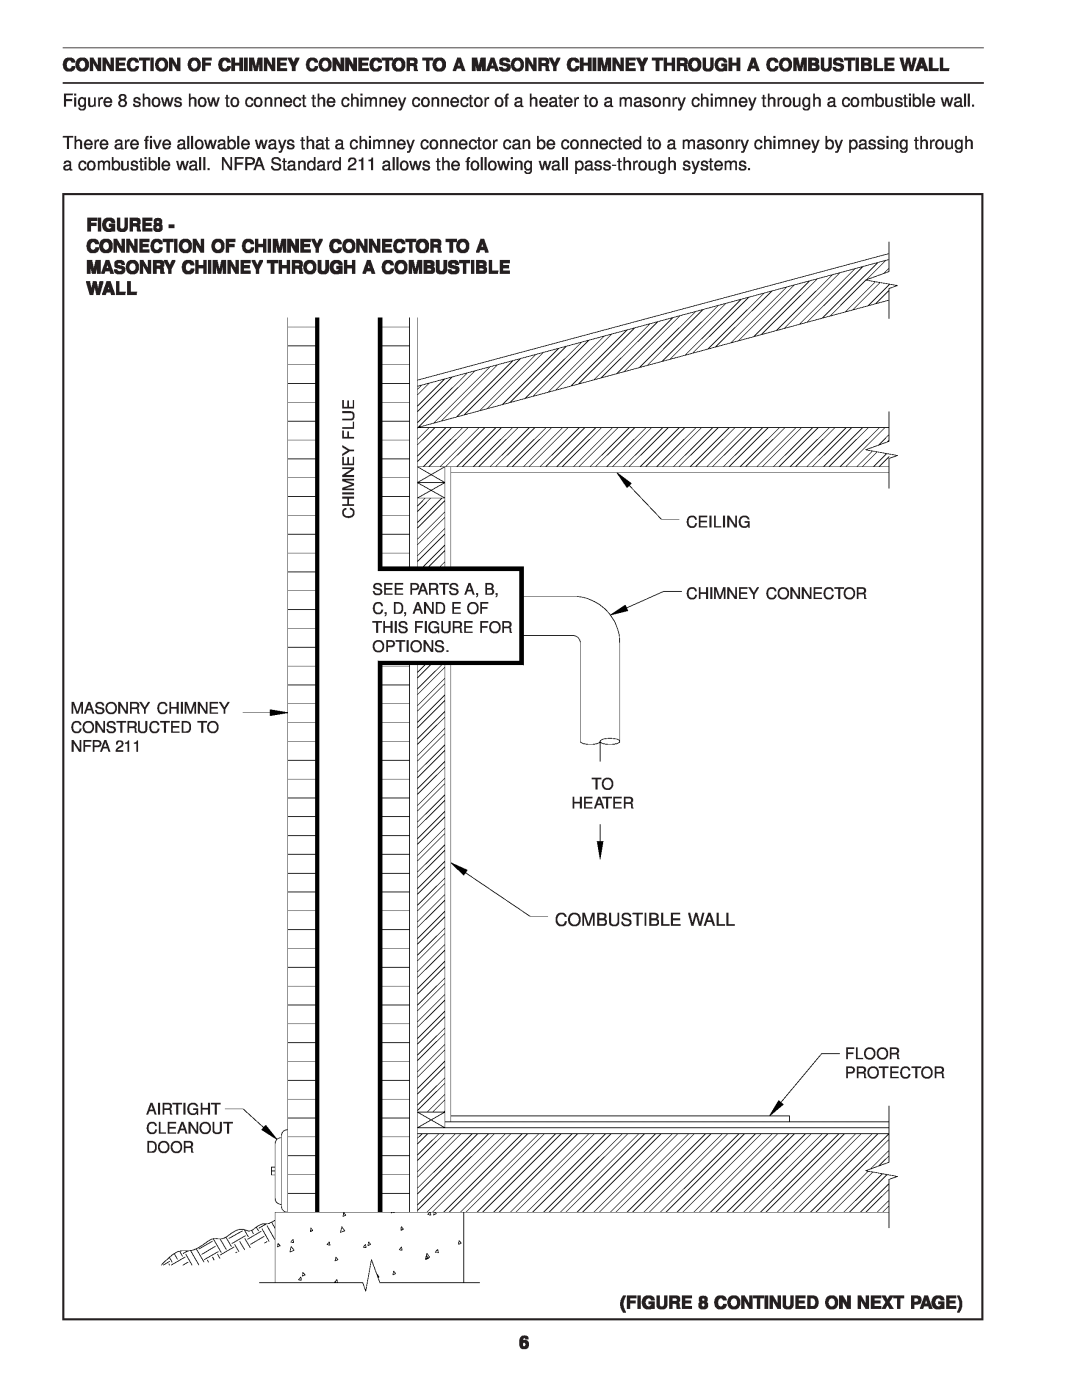 United States Stove C226 owner manual Connection Of Chimney Connector To A, Masonry Chimney Through A Combustible Wall 